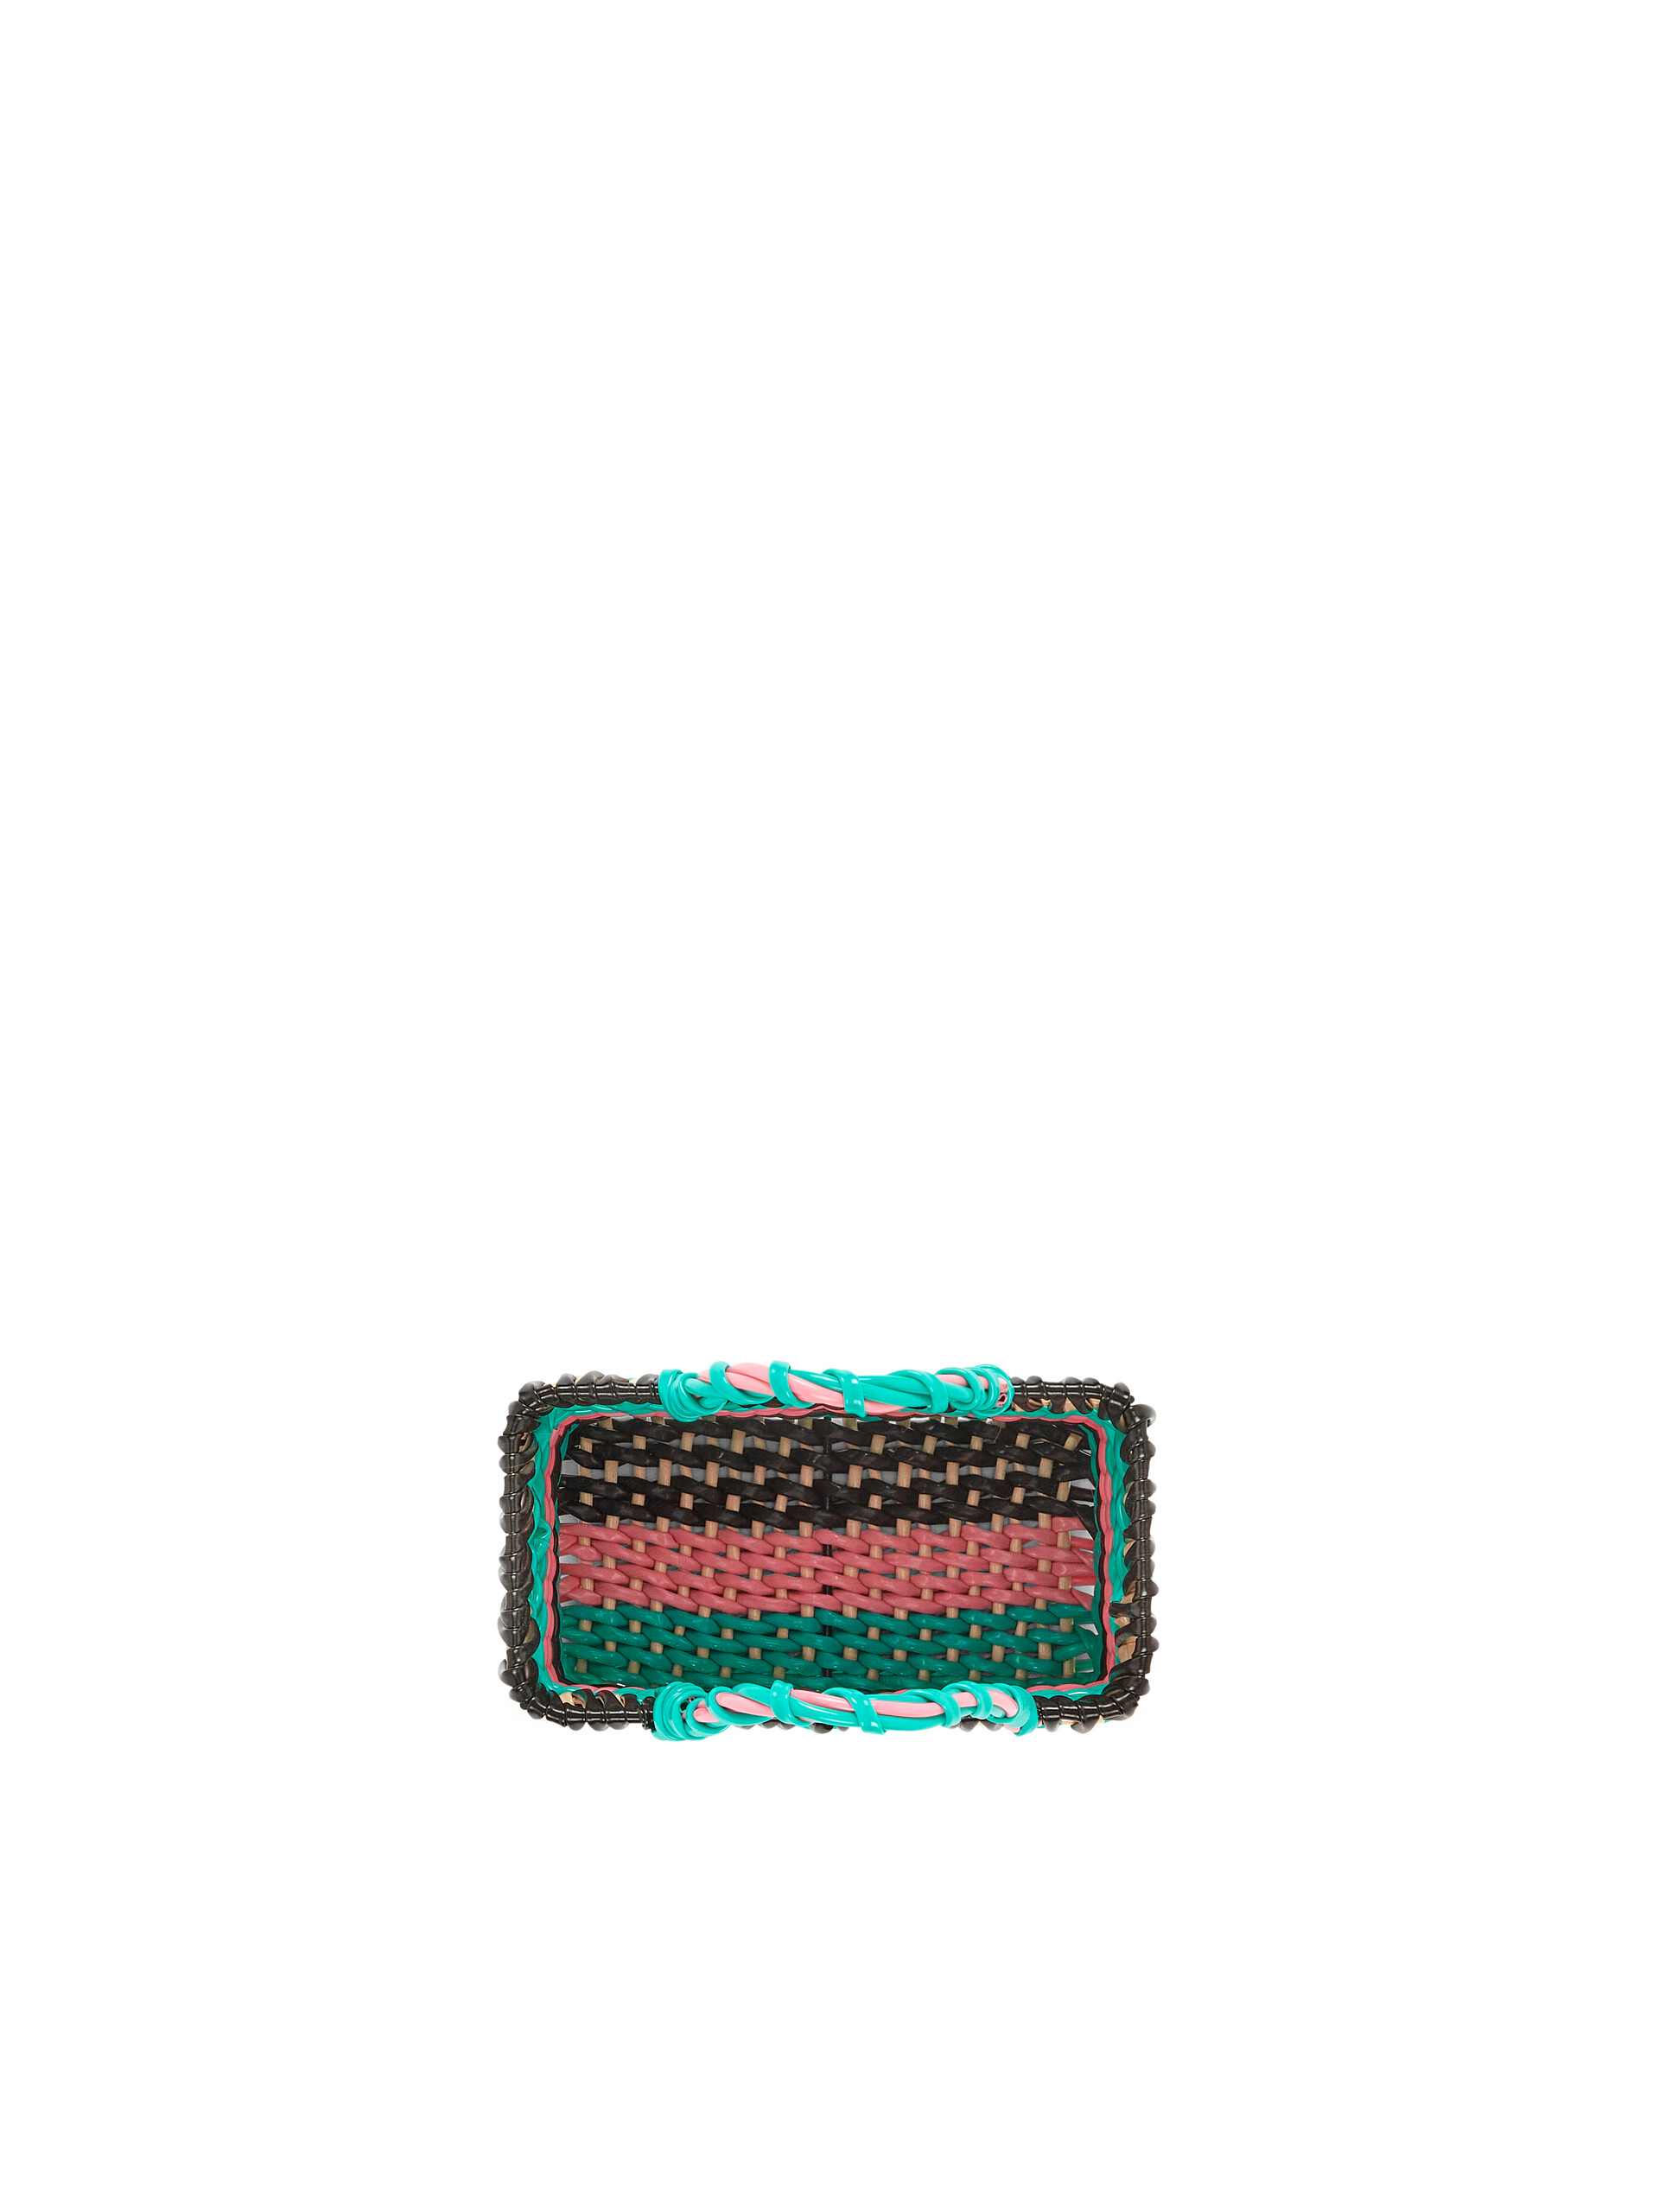 MARNI MARKET basket in iron and green pink and brown PVC - Home Accessories - Image 4